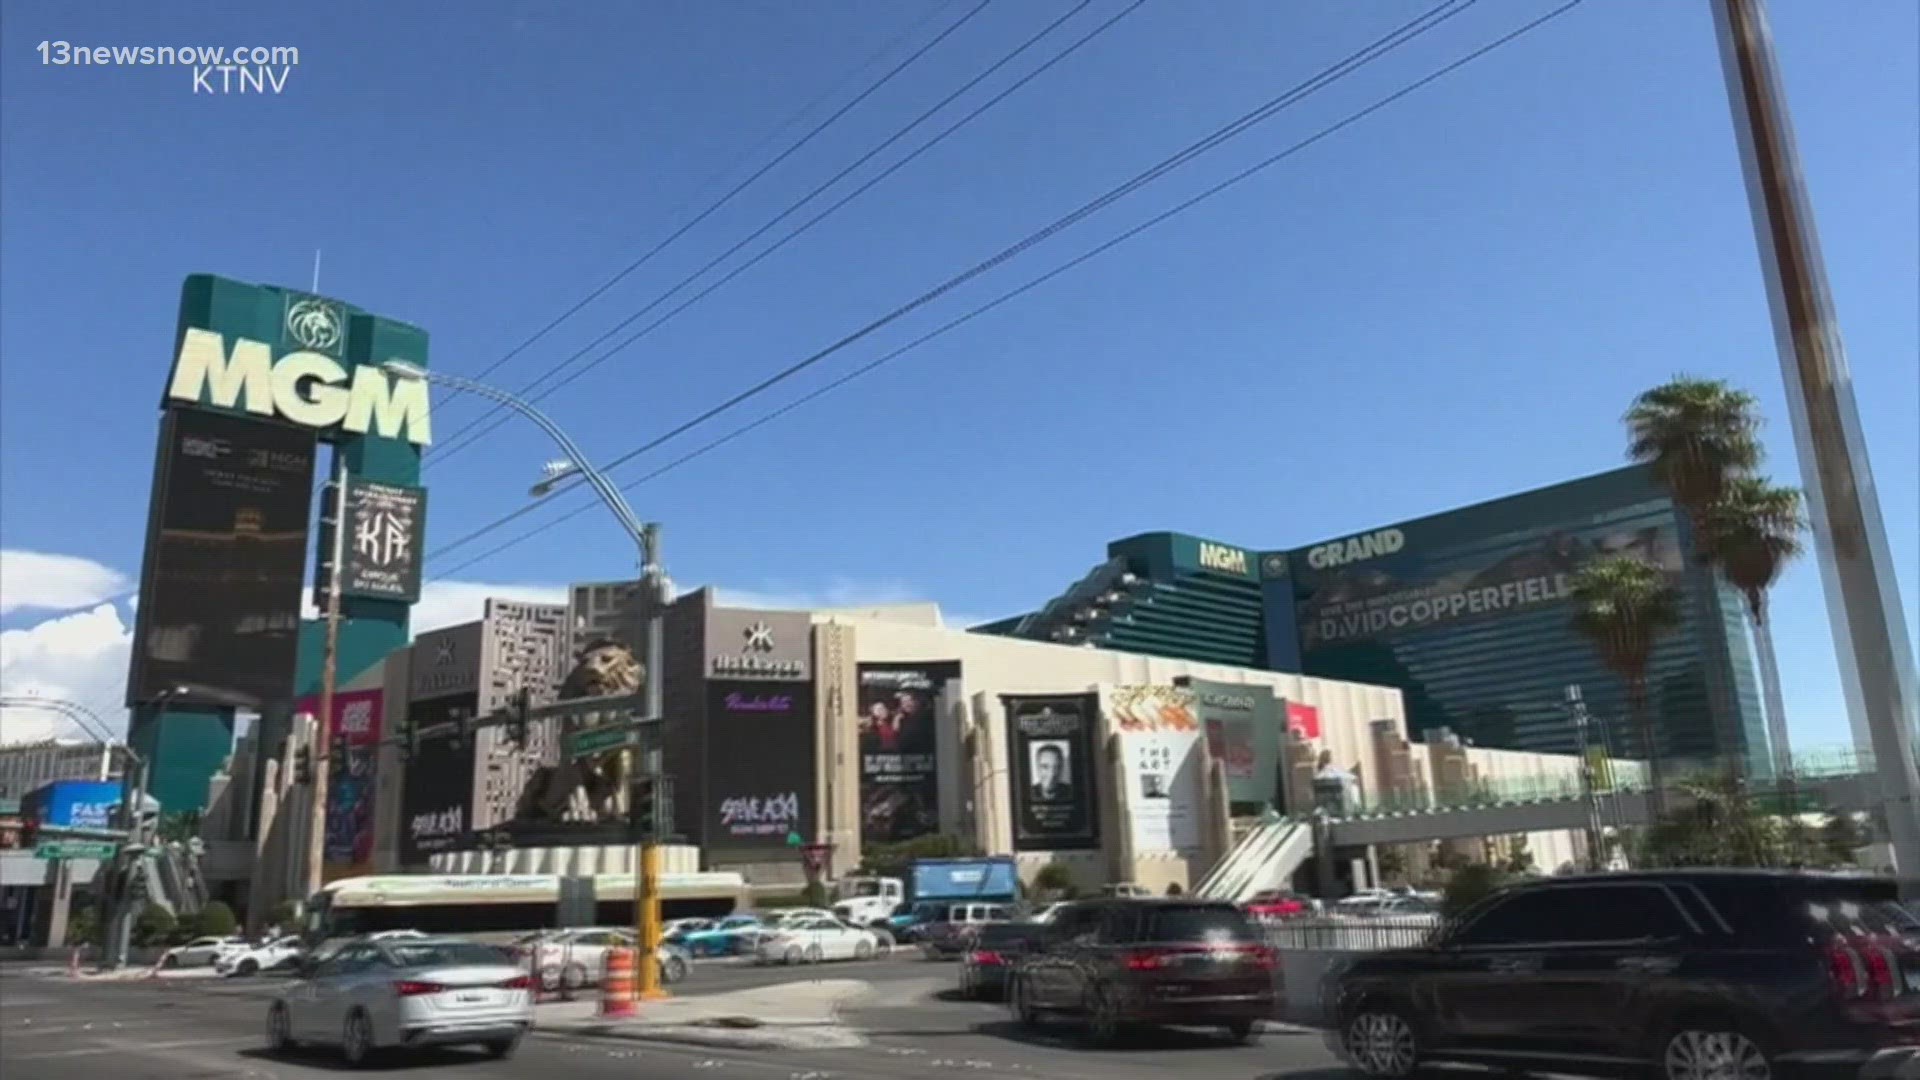 A cyber attack affected some of the most recognizable hotels on the Las Vegas strip on Tuesday. MGM computers went down.